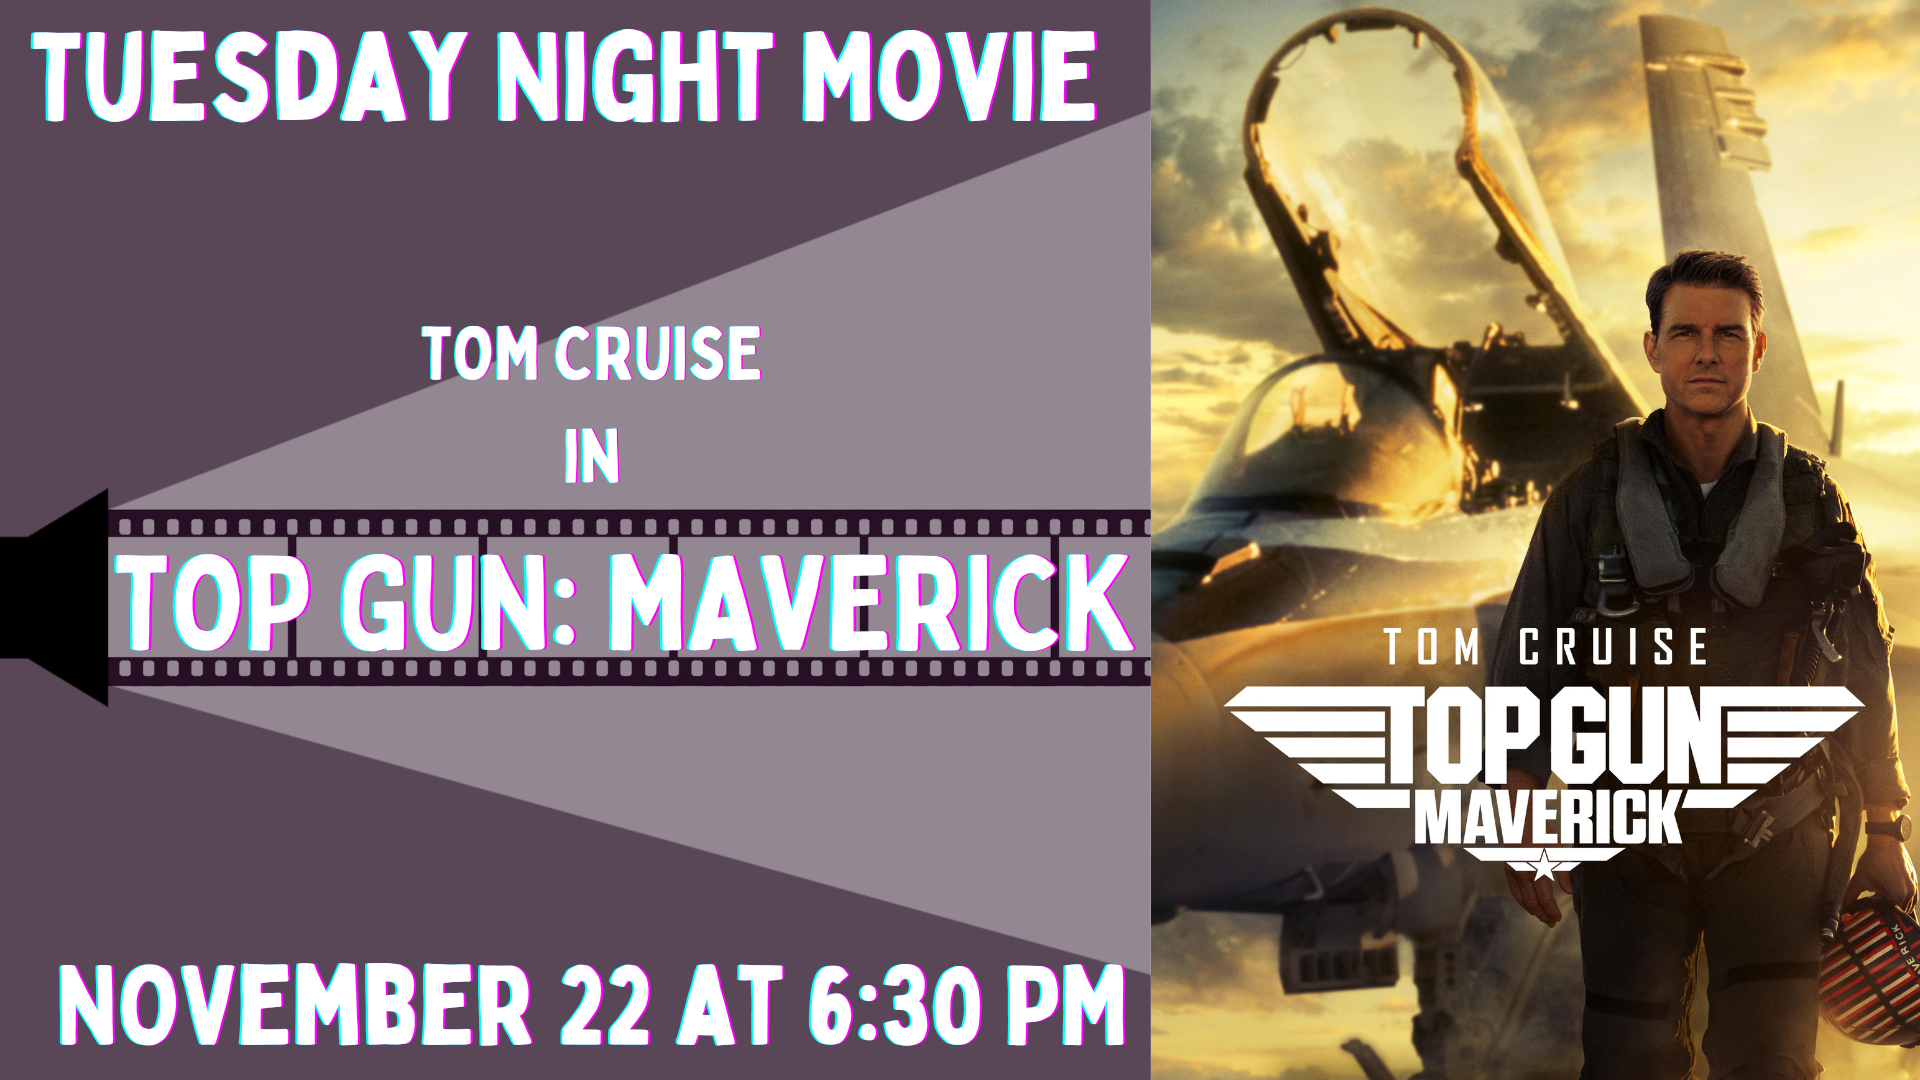 Banner advertising our screening of TOP GUN: MAVERICK on 11/22 at 6:30 PM, featuring the movie poster with Tom Cruise in front of a fighter jet